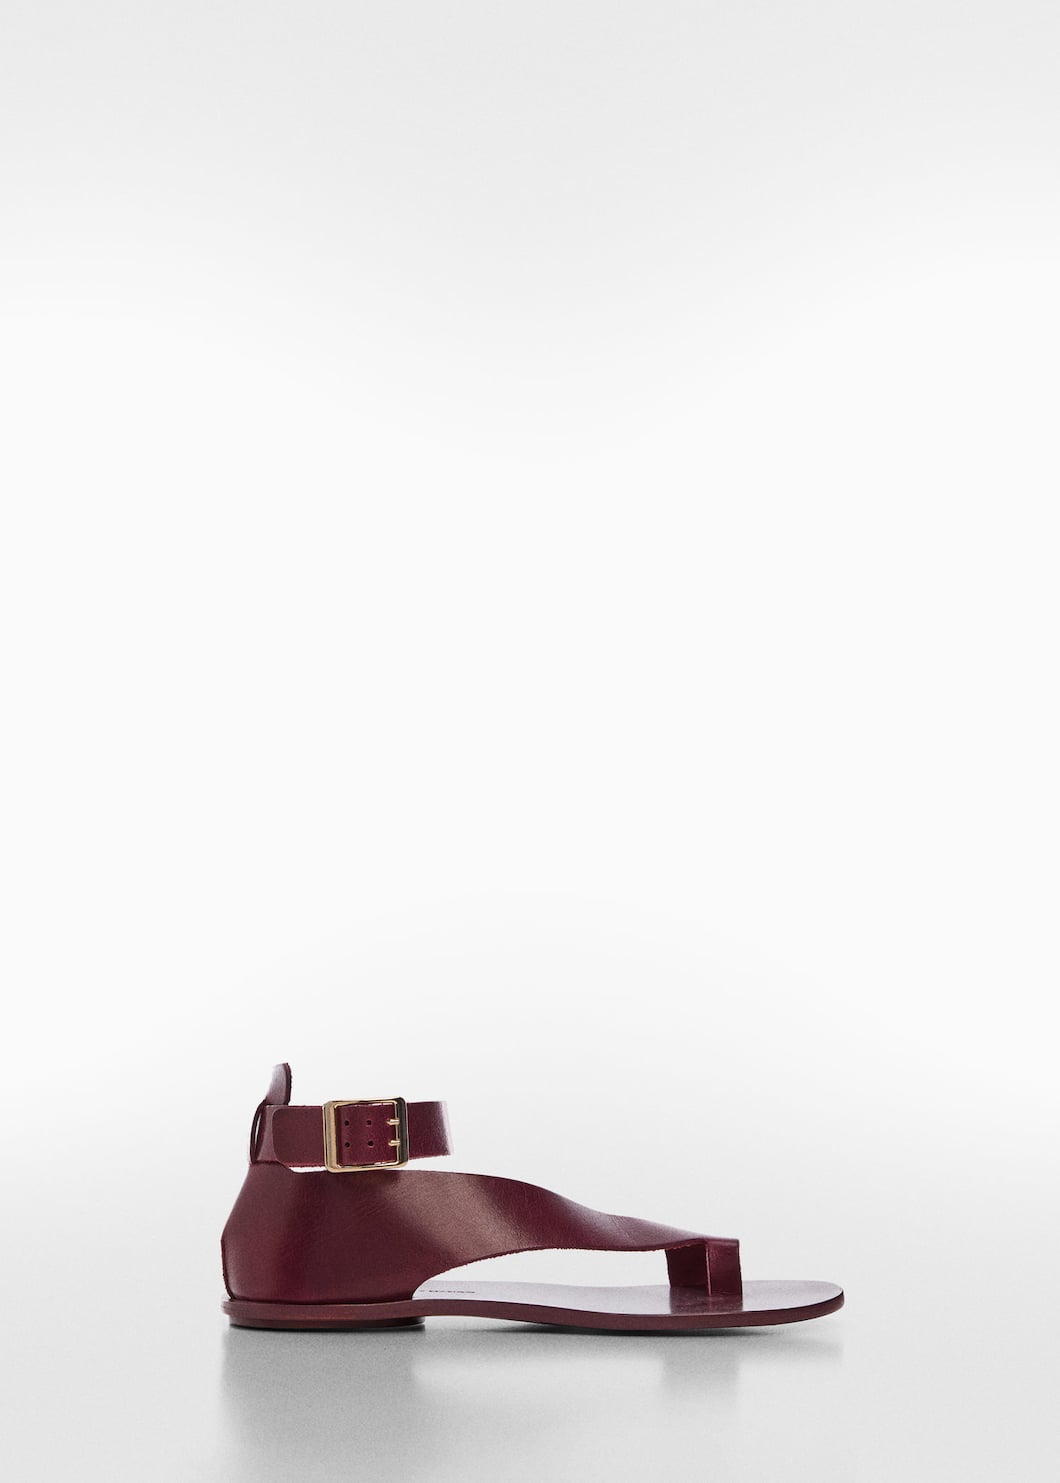 Zara + Flat Leather Cage Sandals